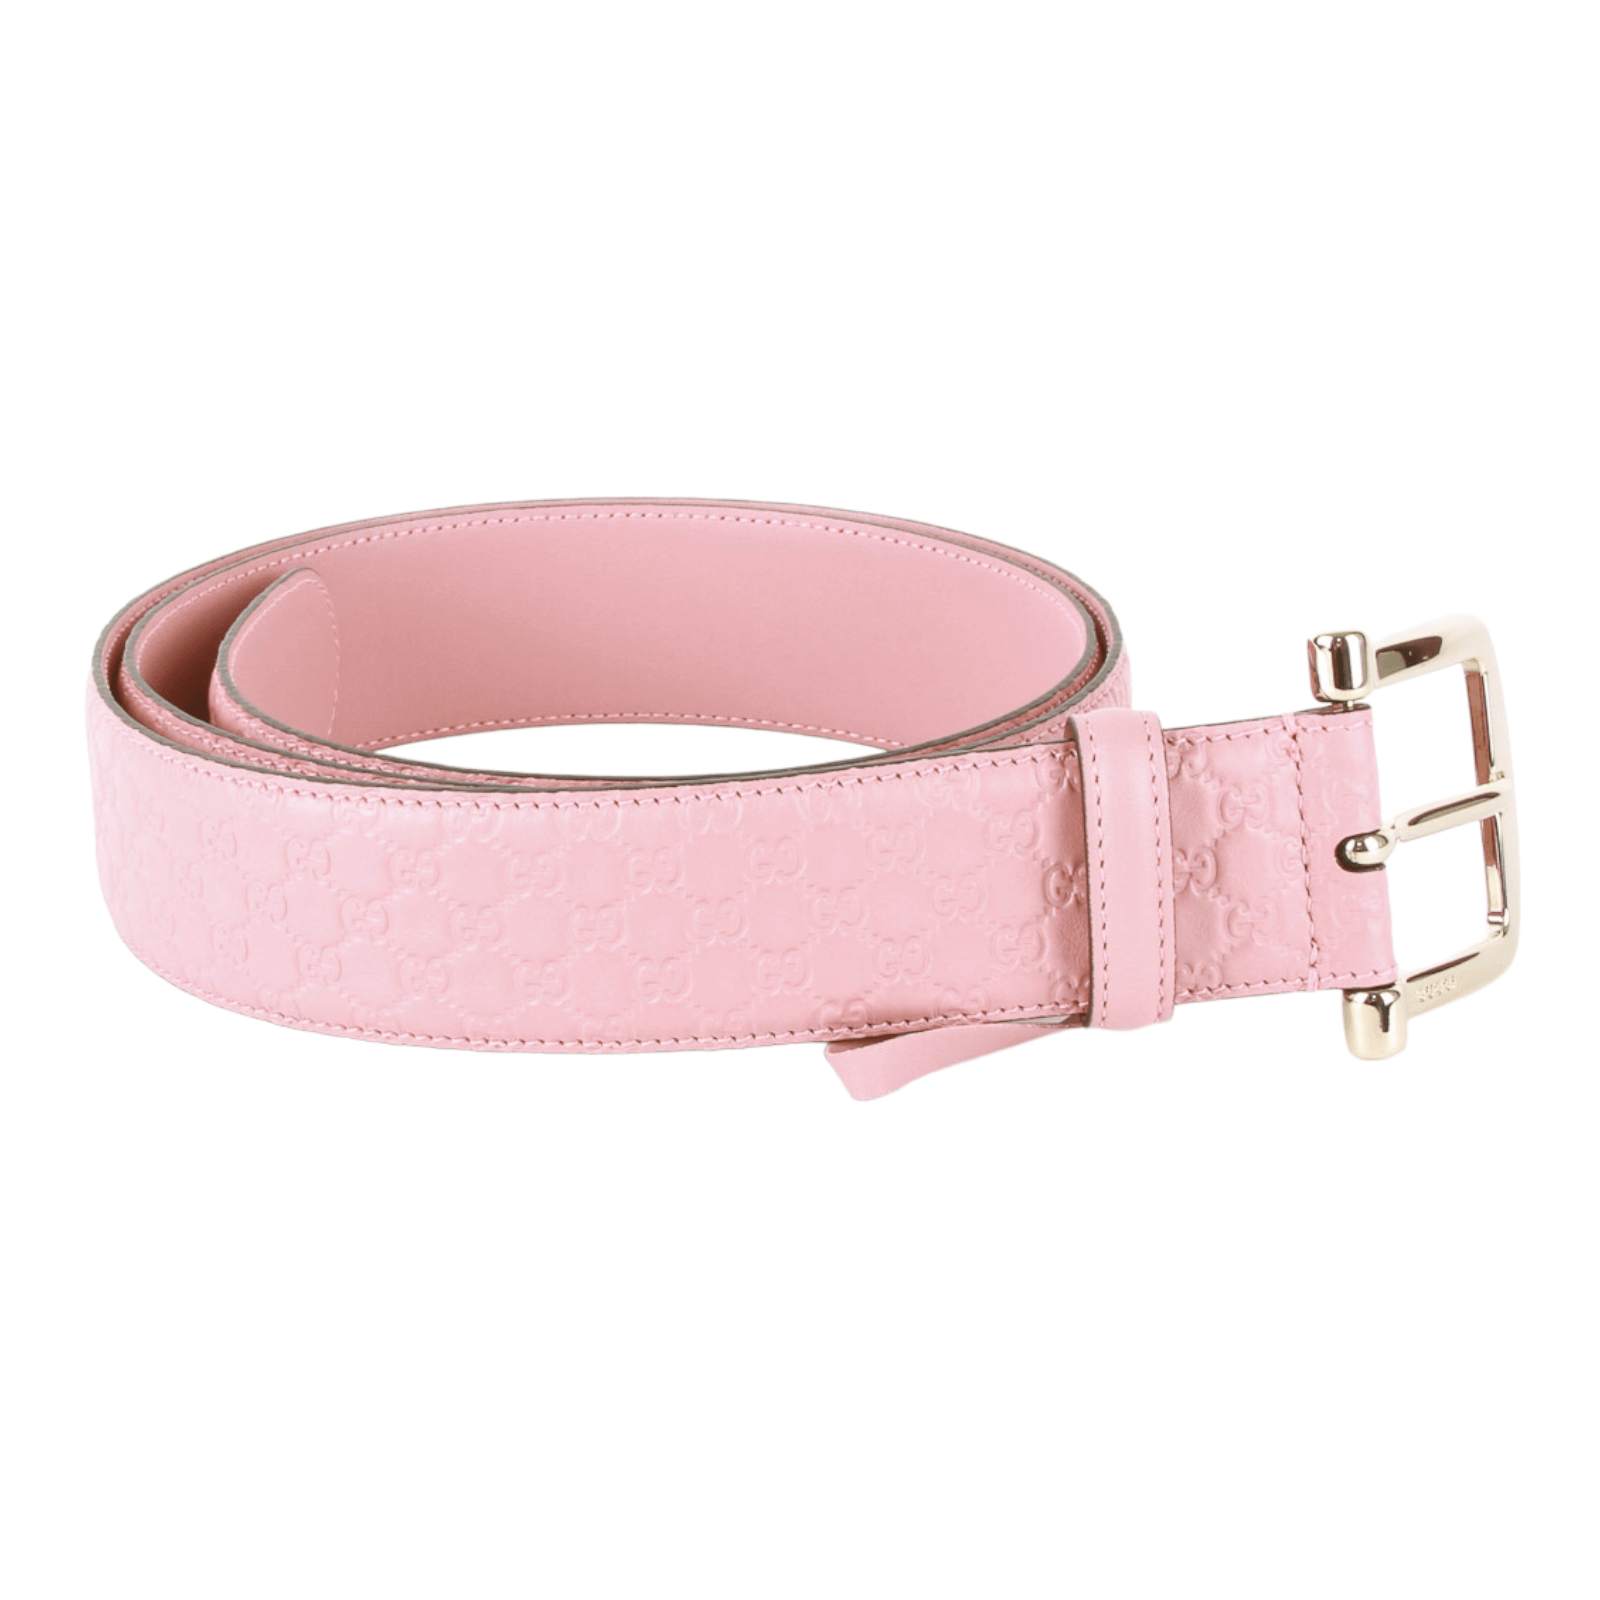 Gucci Women's Pink Leather GG Microguccissima Buckle Belt